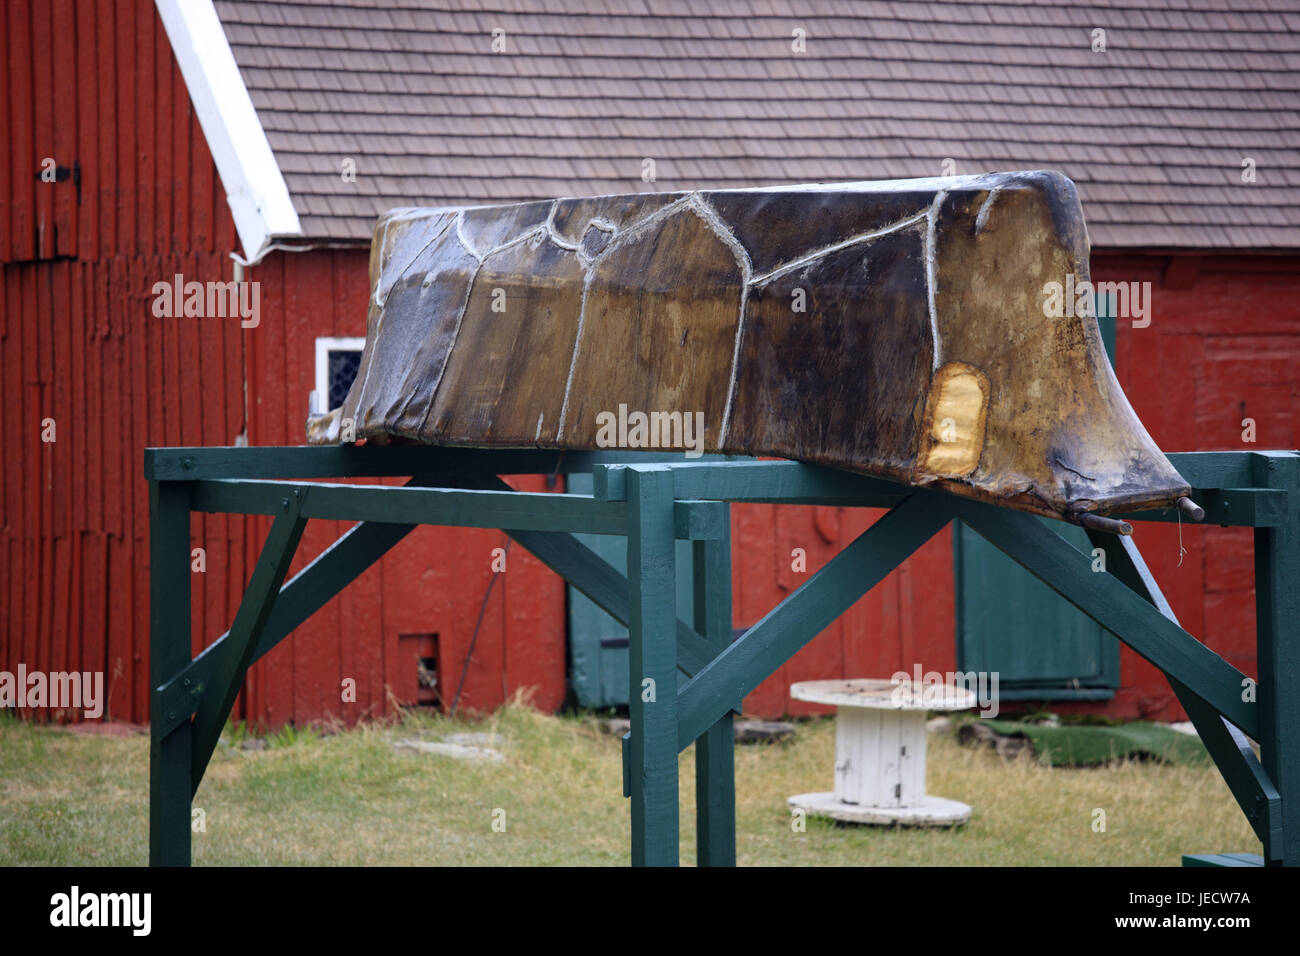 Greenland, Sisimiut, museum, mounting, canoe, historically, Western Greenland, town, destination, place of interest, culture, outside, Inuit, Inuit culture, house, building, wooden house, red, architecture, wooden rack, device, deserted, Stock Photo